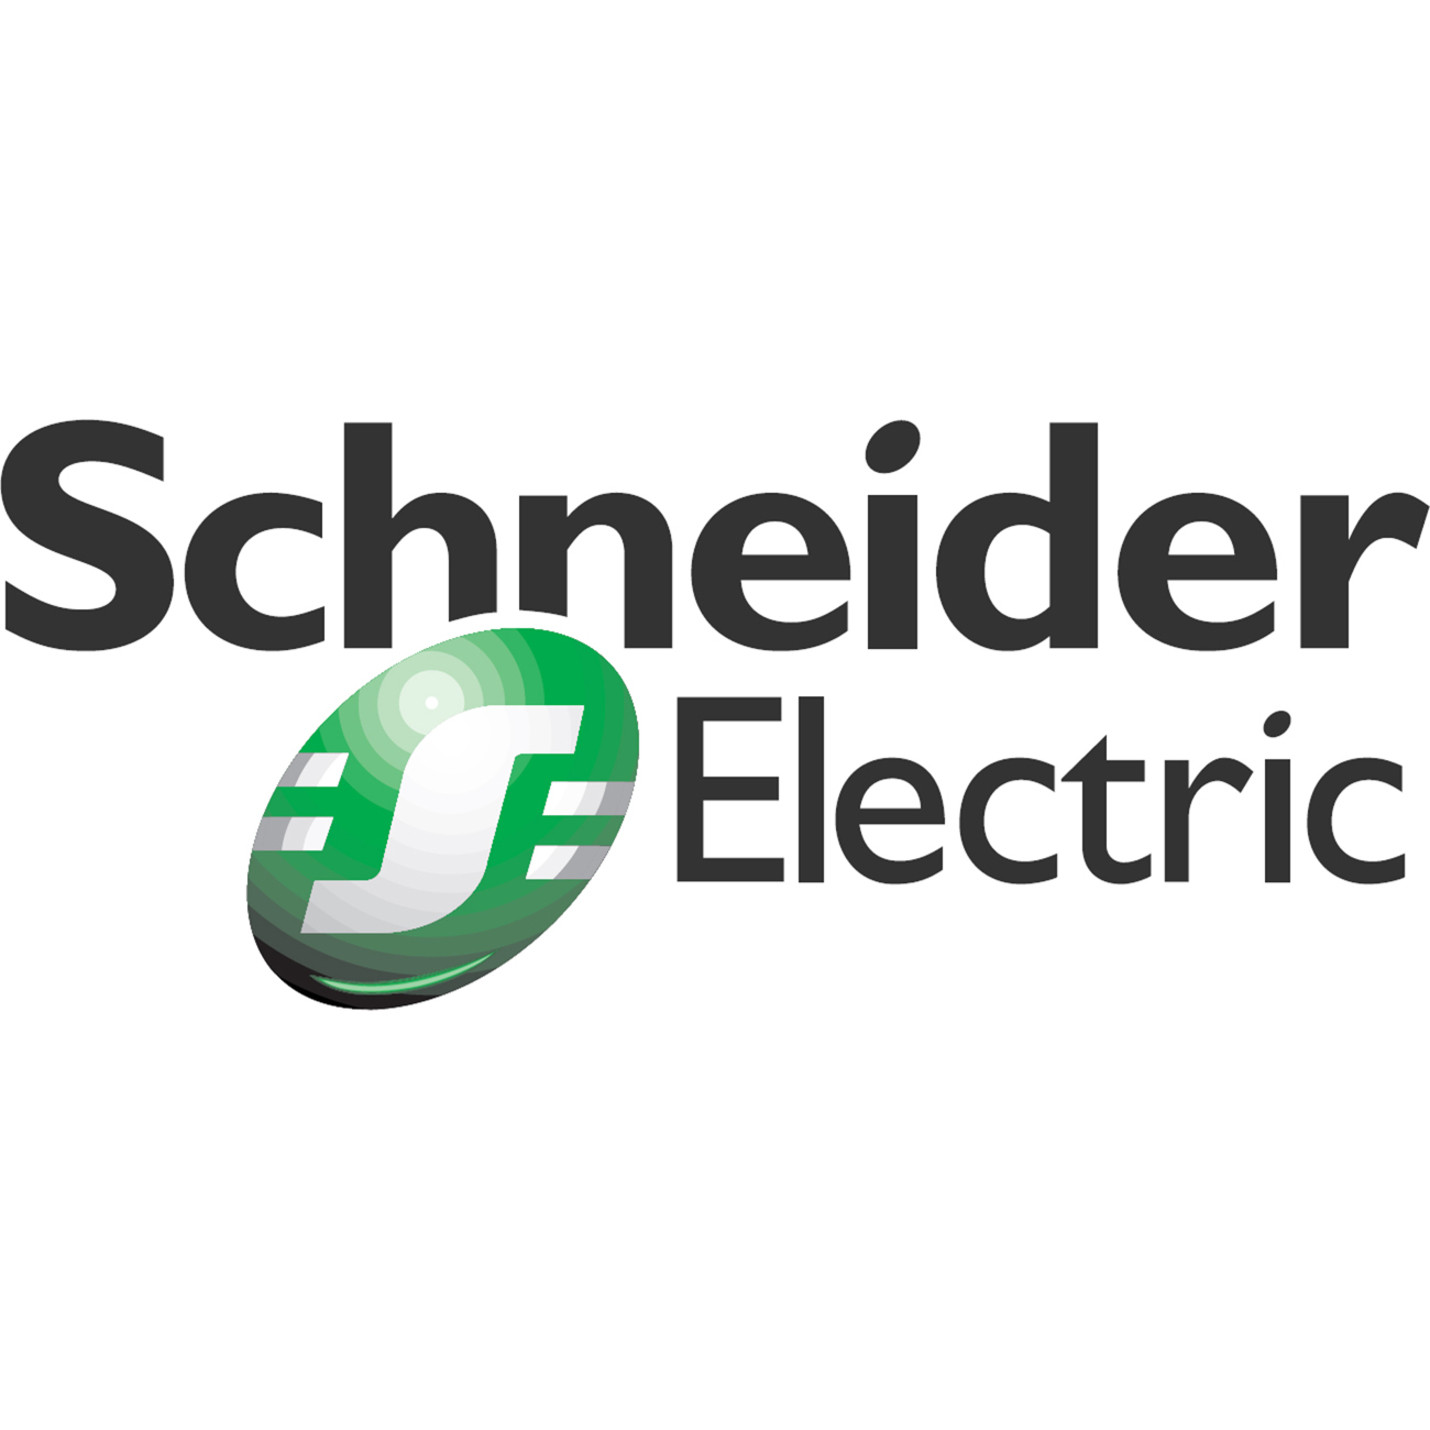 APC by Schneider Electric Scheduled Assembly ServiceService8 x 5InstallationLaborElectronic and Physical WASSEMEXBAT-VM-24